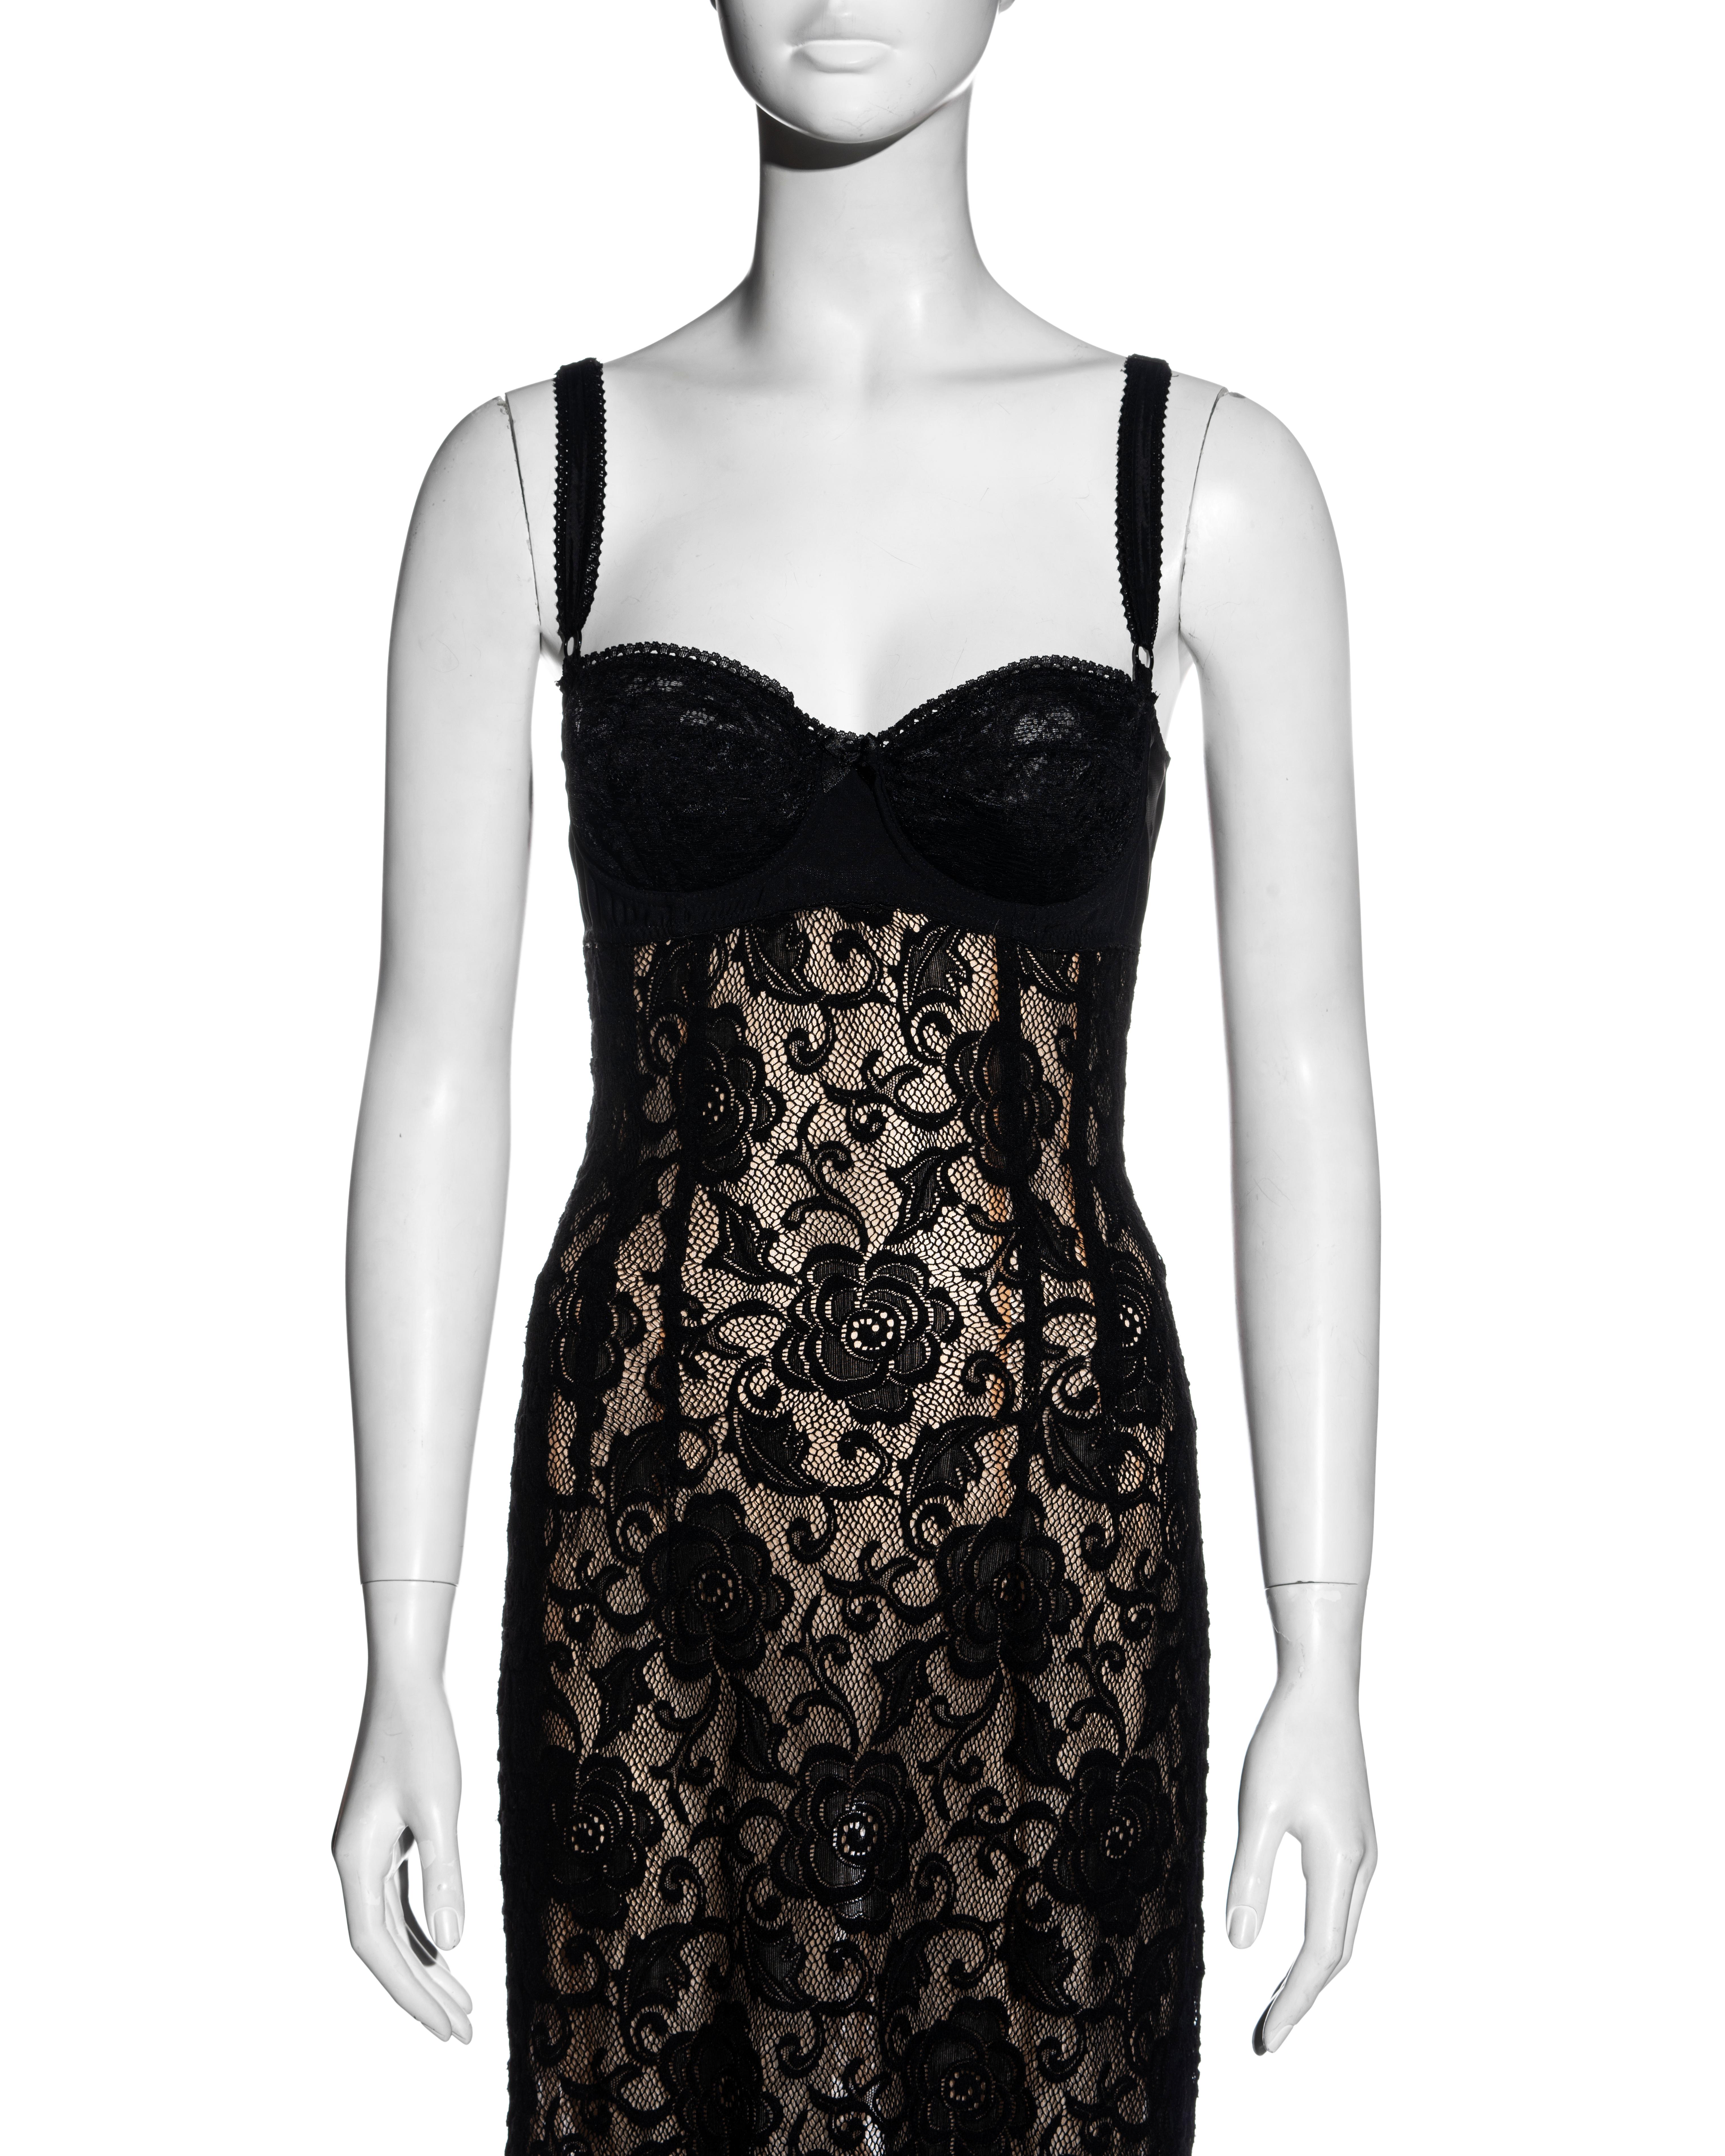 Black Dolce & Gabbana black lace evening dress with attached bra, ss 1997